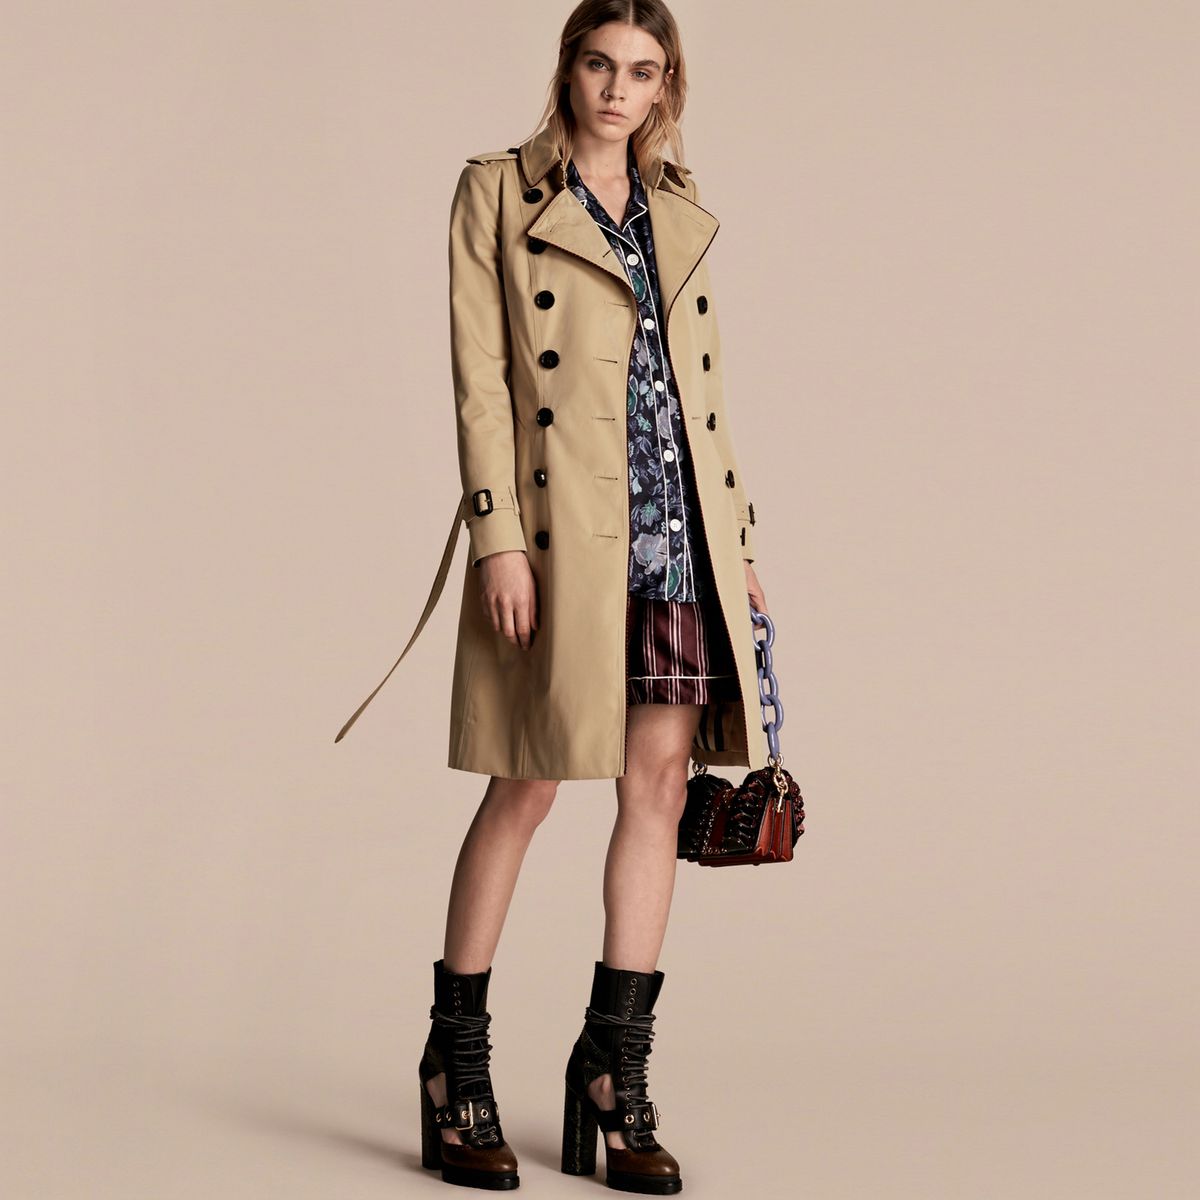 burberry sale boots